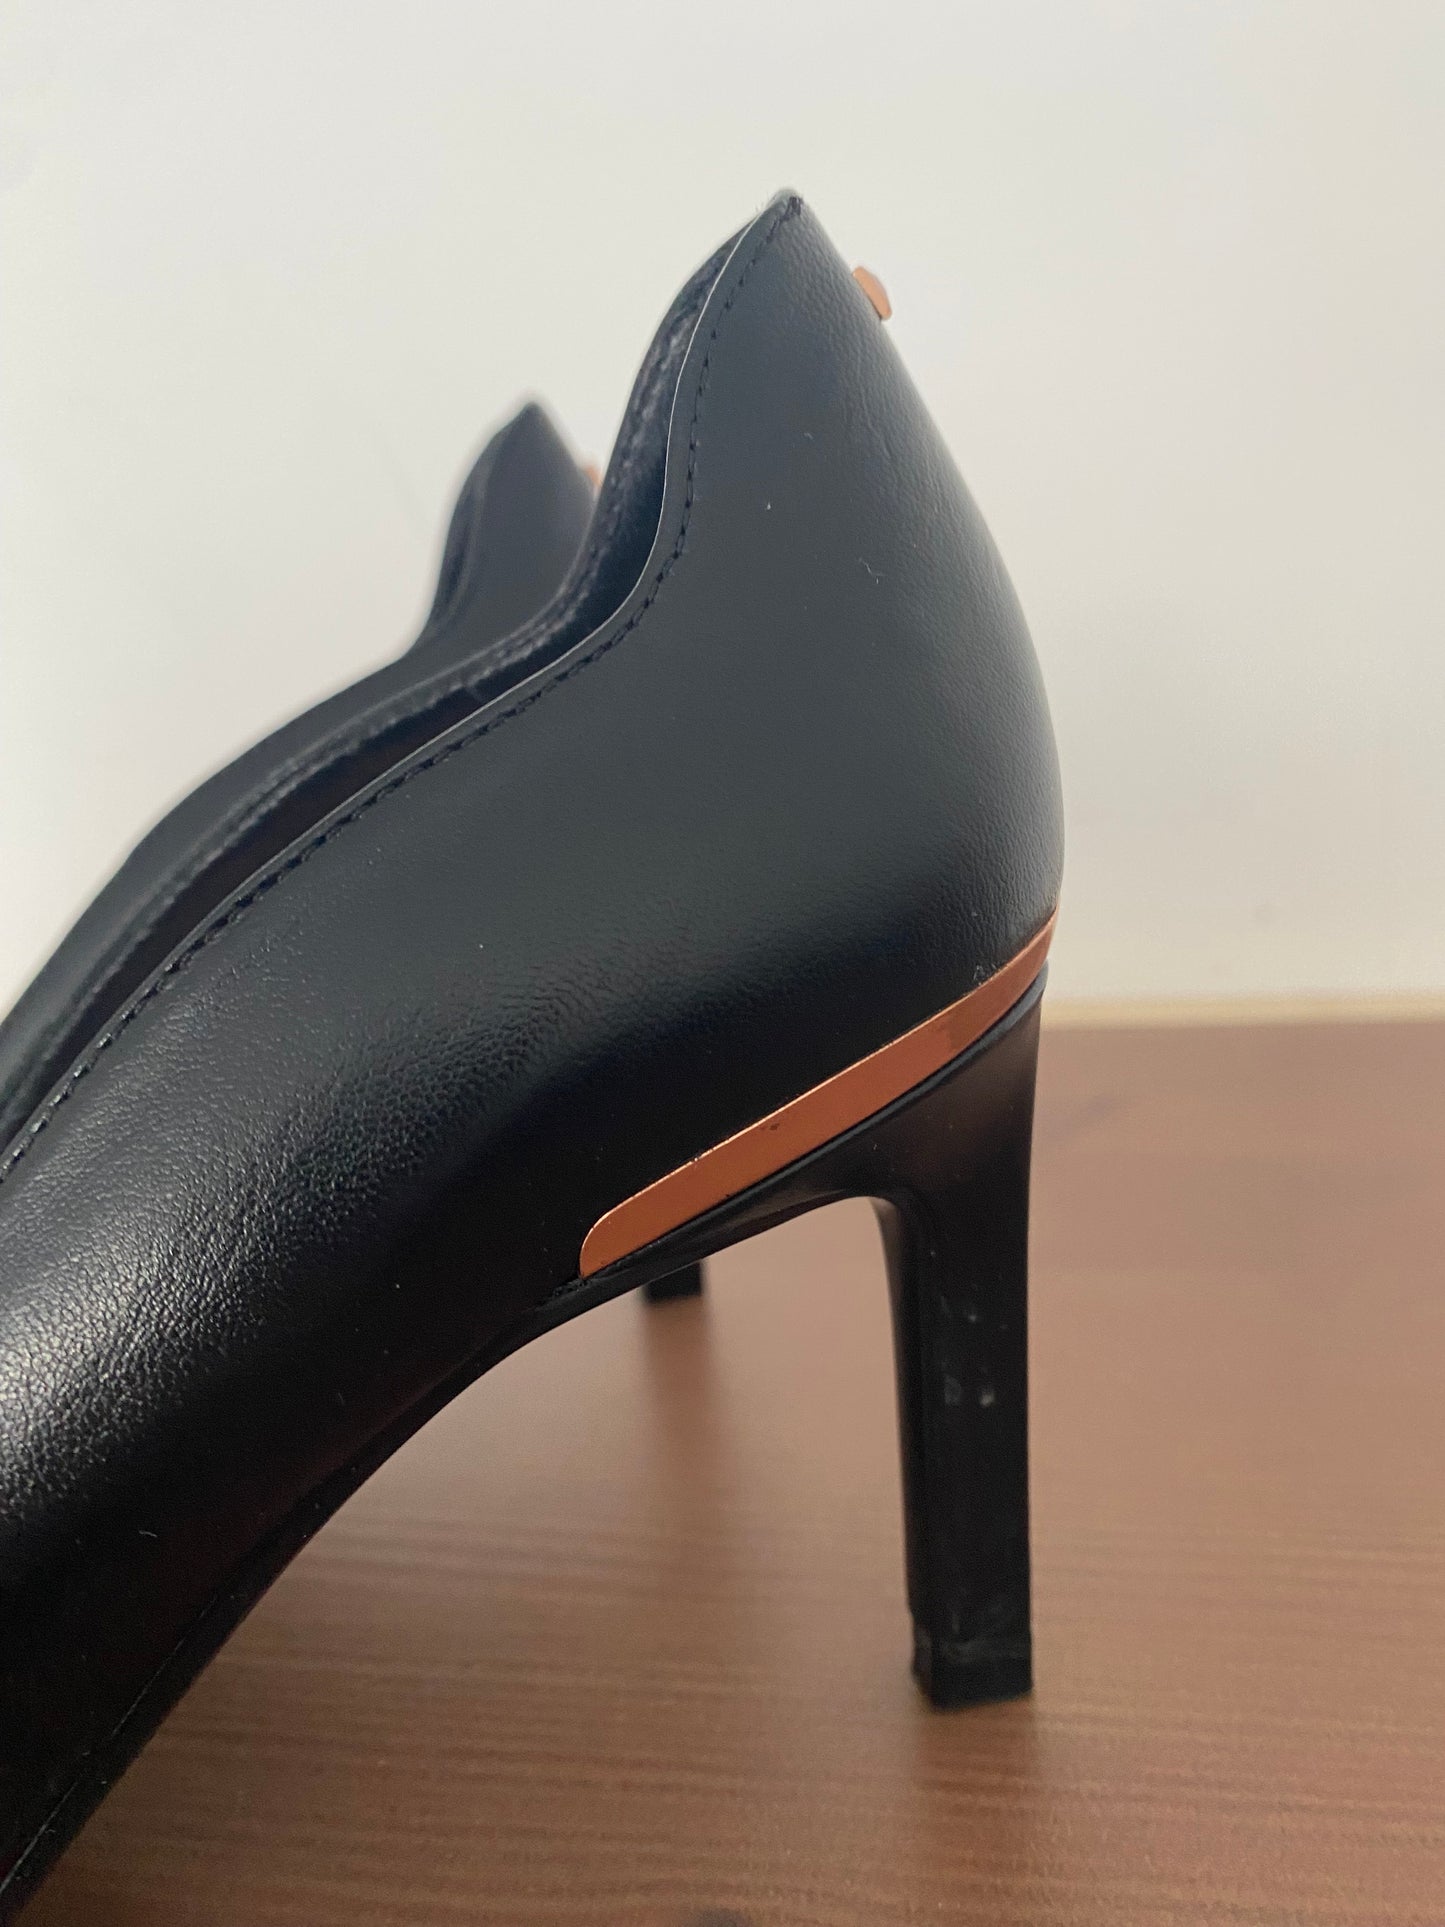 Ted Baker Black Leather Court Shoes Size 4